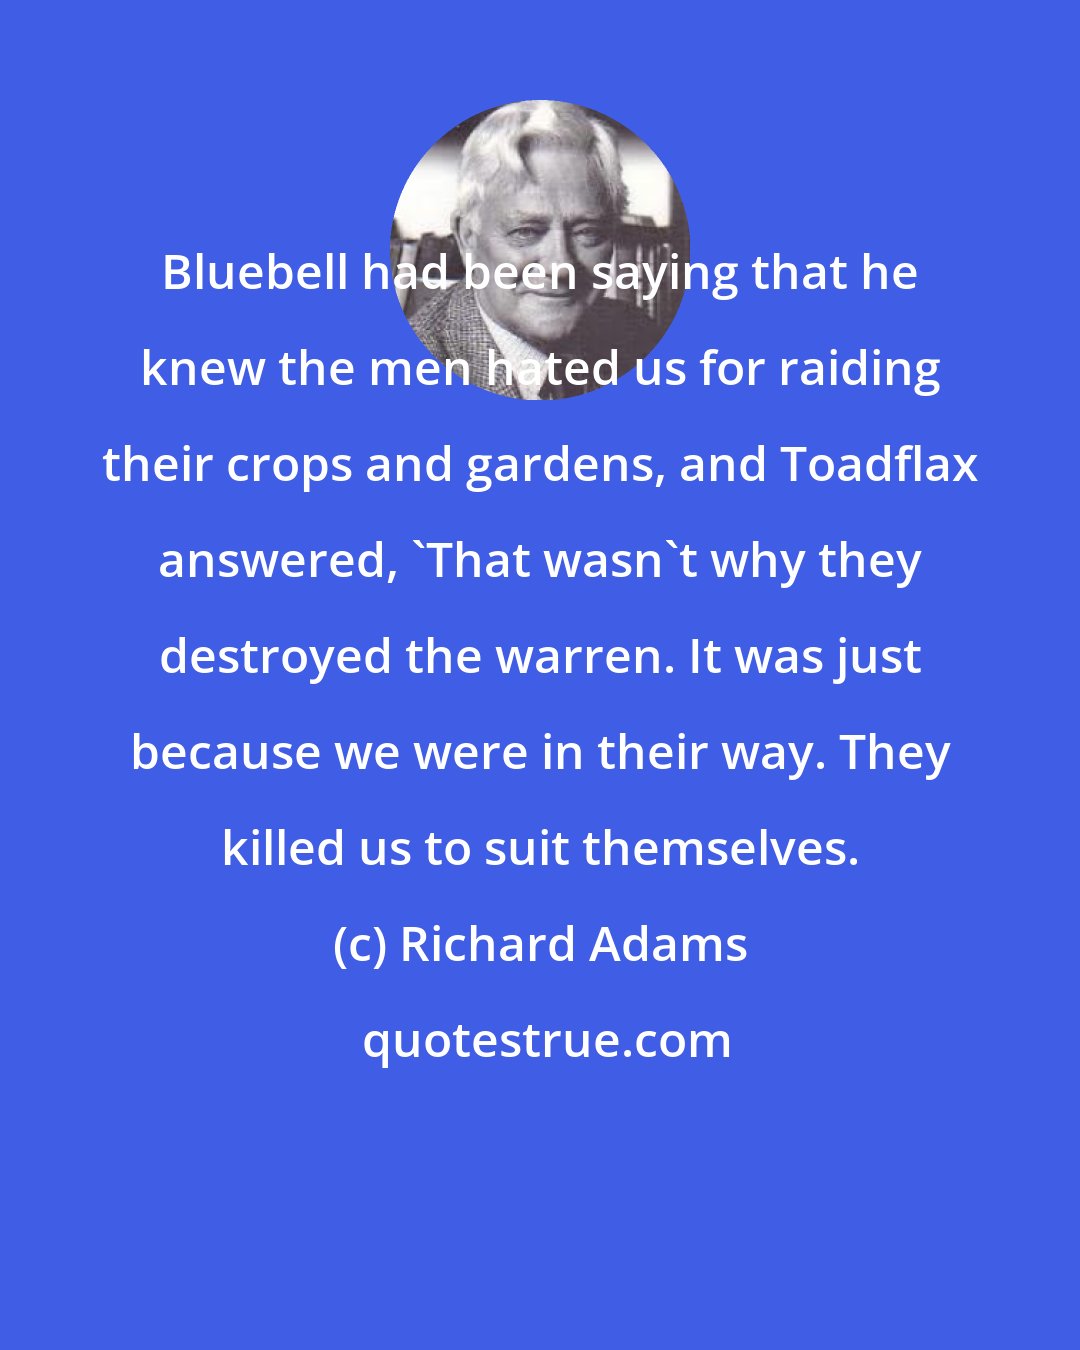 Richard Adams: Bluebell had been saying that he knew the men hated us for raiding their crops and gardens, and Toadflax answered, 'That wasn't why they destroyed the warren. It was just because we were in their way. They killed us to suit themselves.